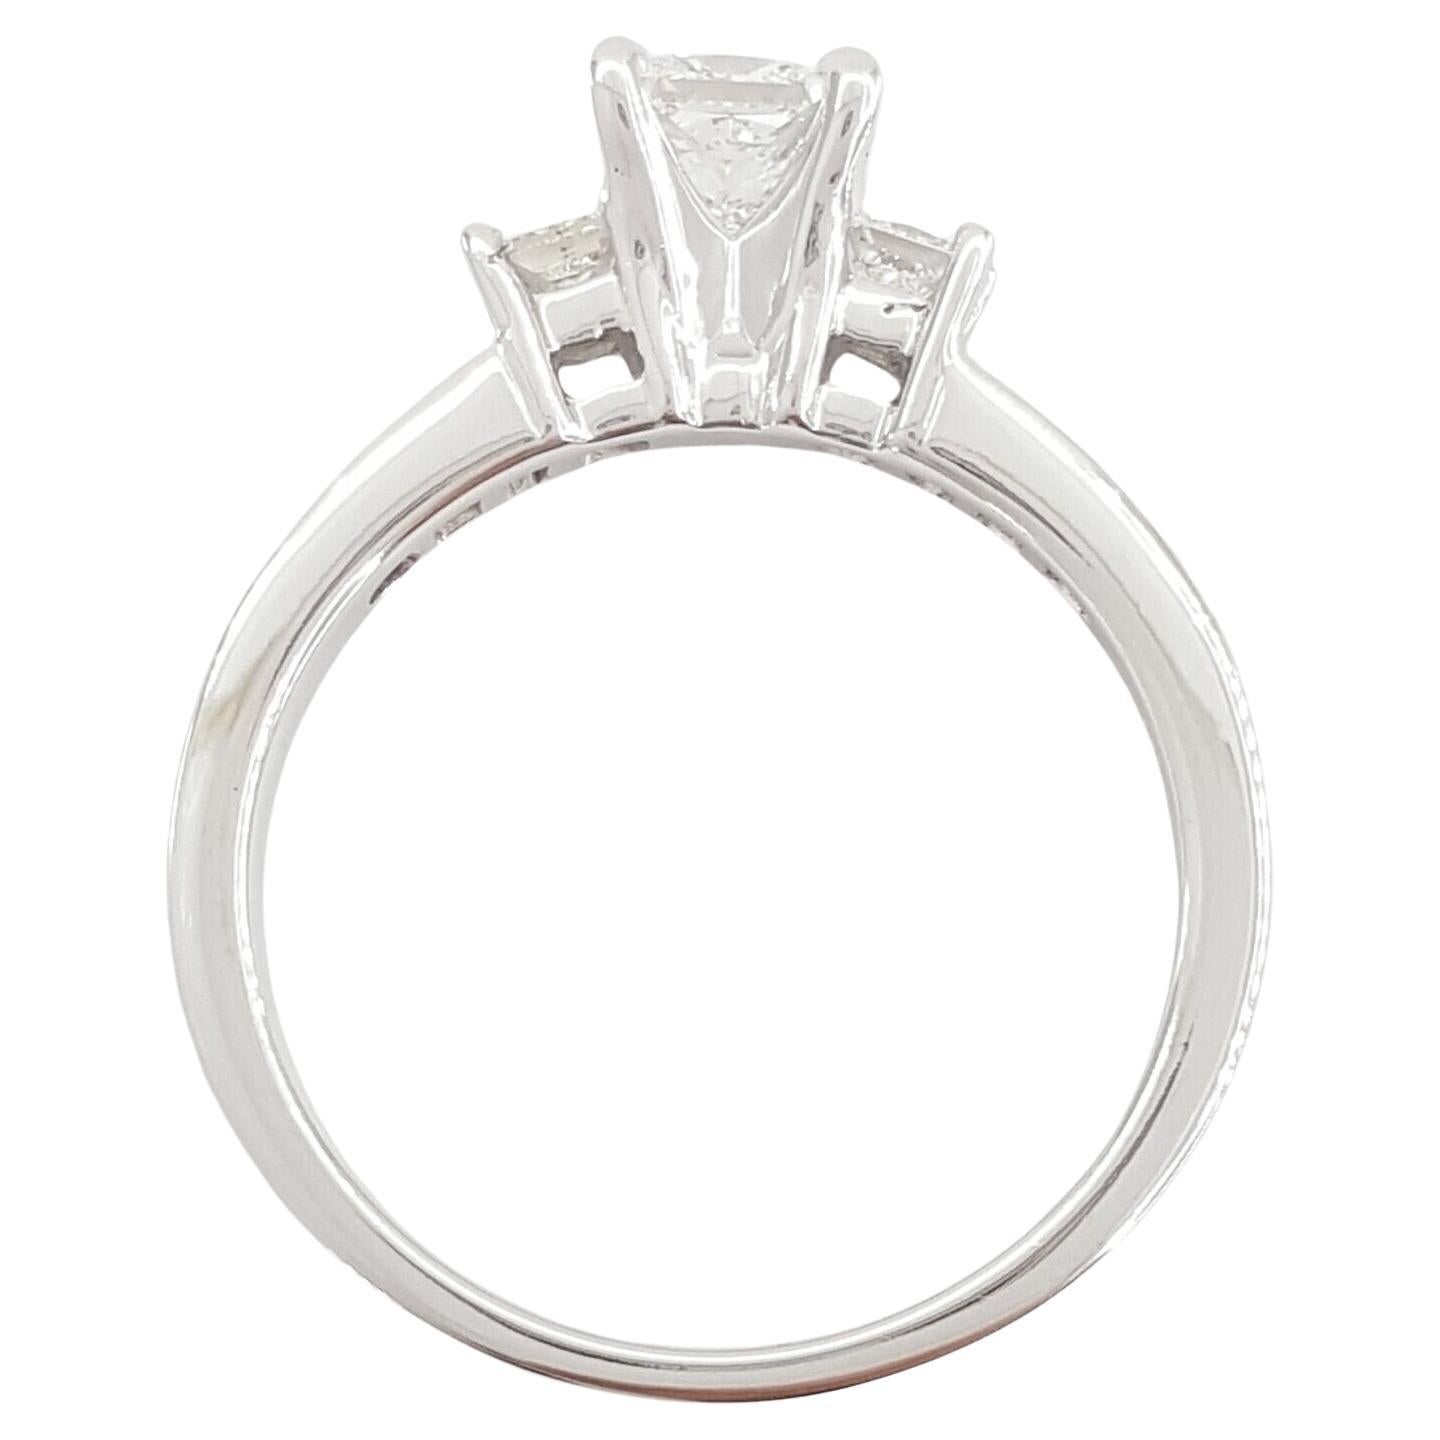 This 14k White Gold Engagement Ring features a total diamond weight of 1 carat, with a central Natural Princess Brilliant Cut Diamond measuring 4.1 x 4.2 mm, F color, and VS1-VS2 clarity. The ring, weighing 3.8 grams and sized 6.75, showcases an